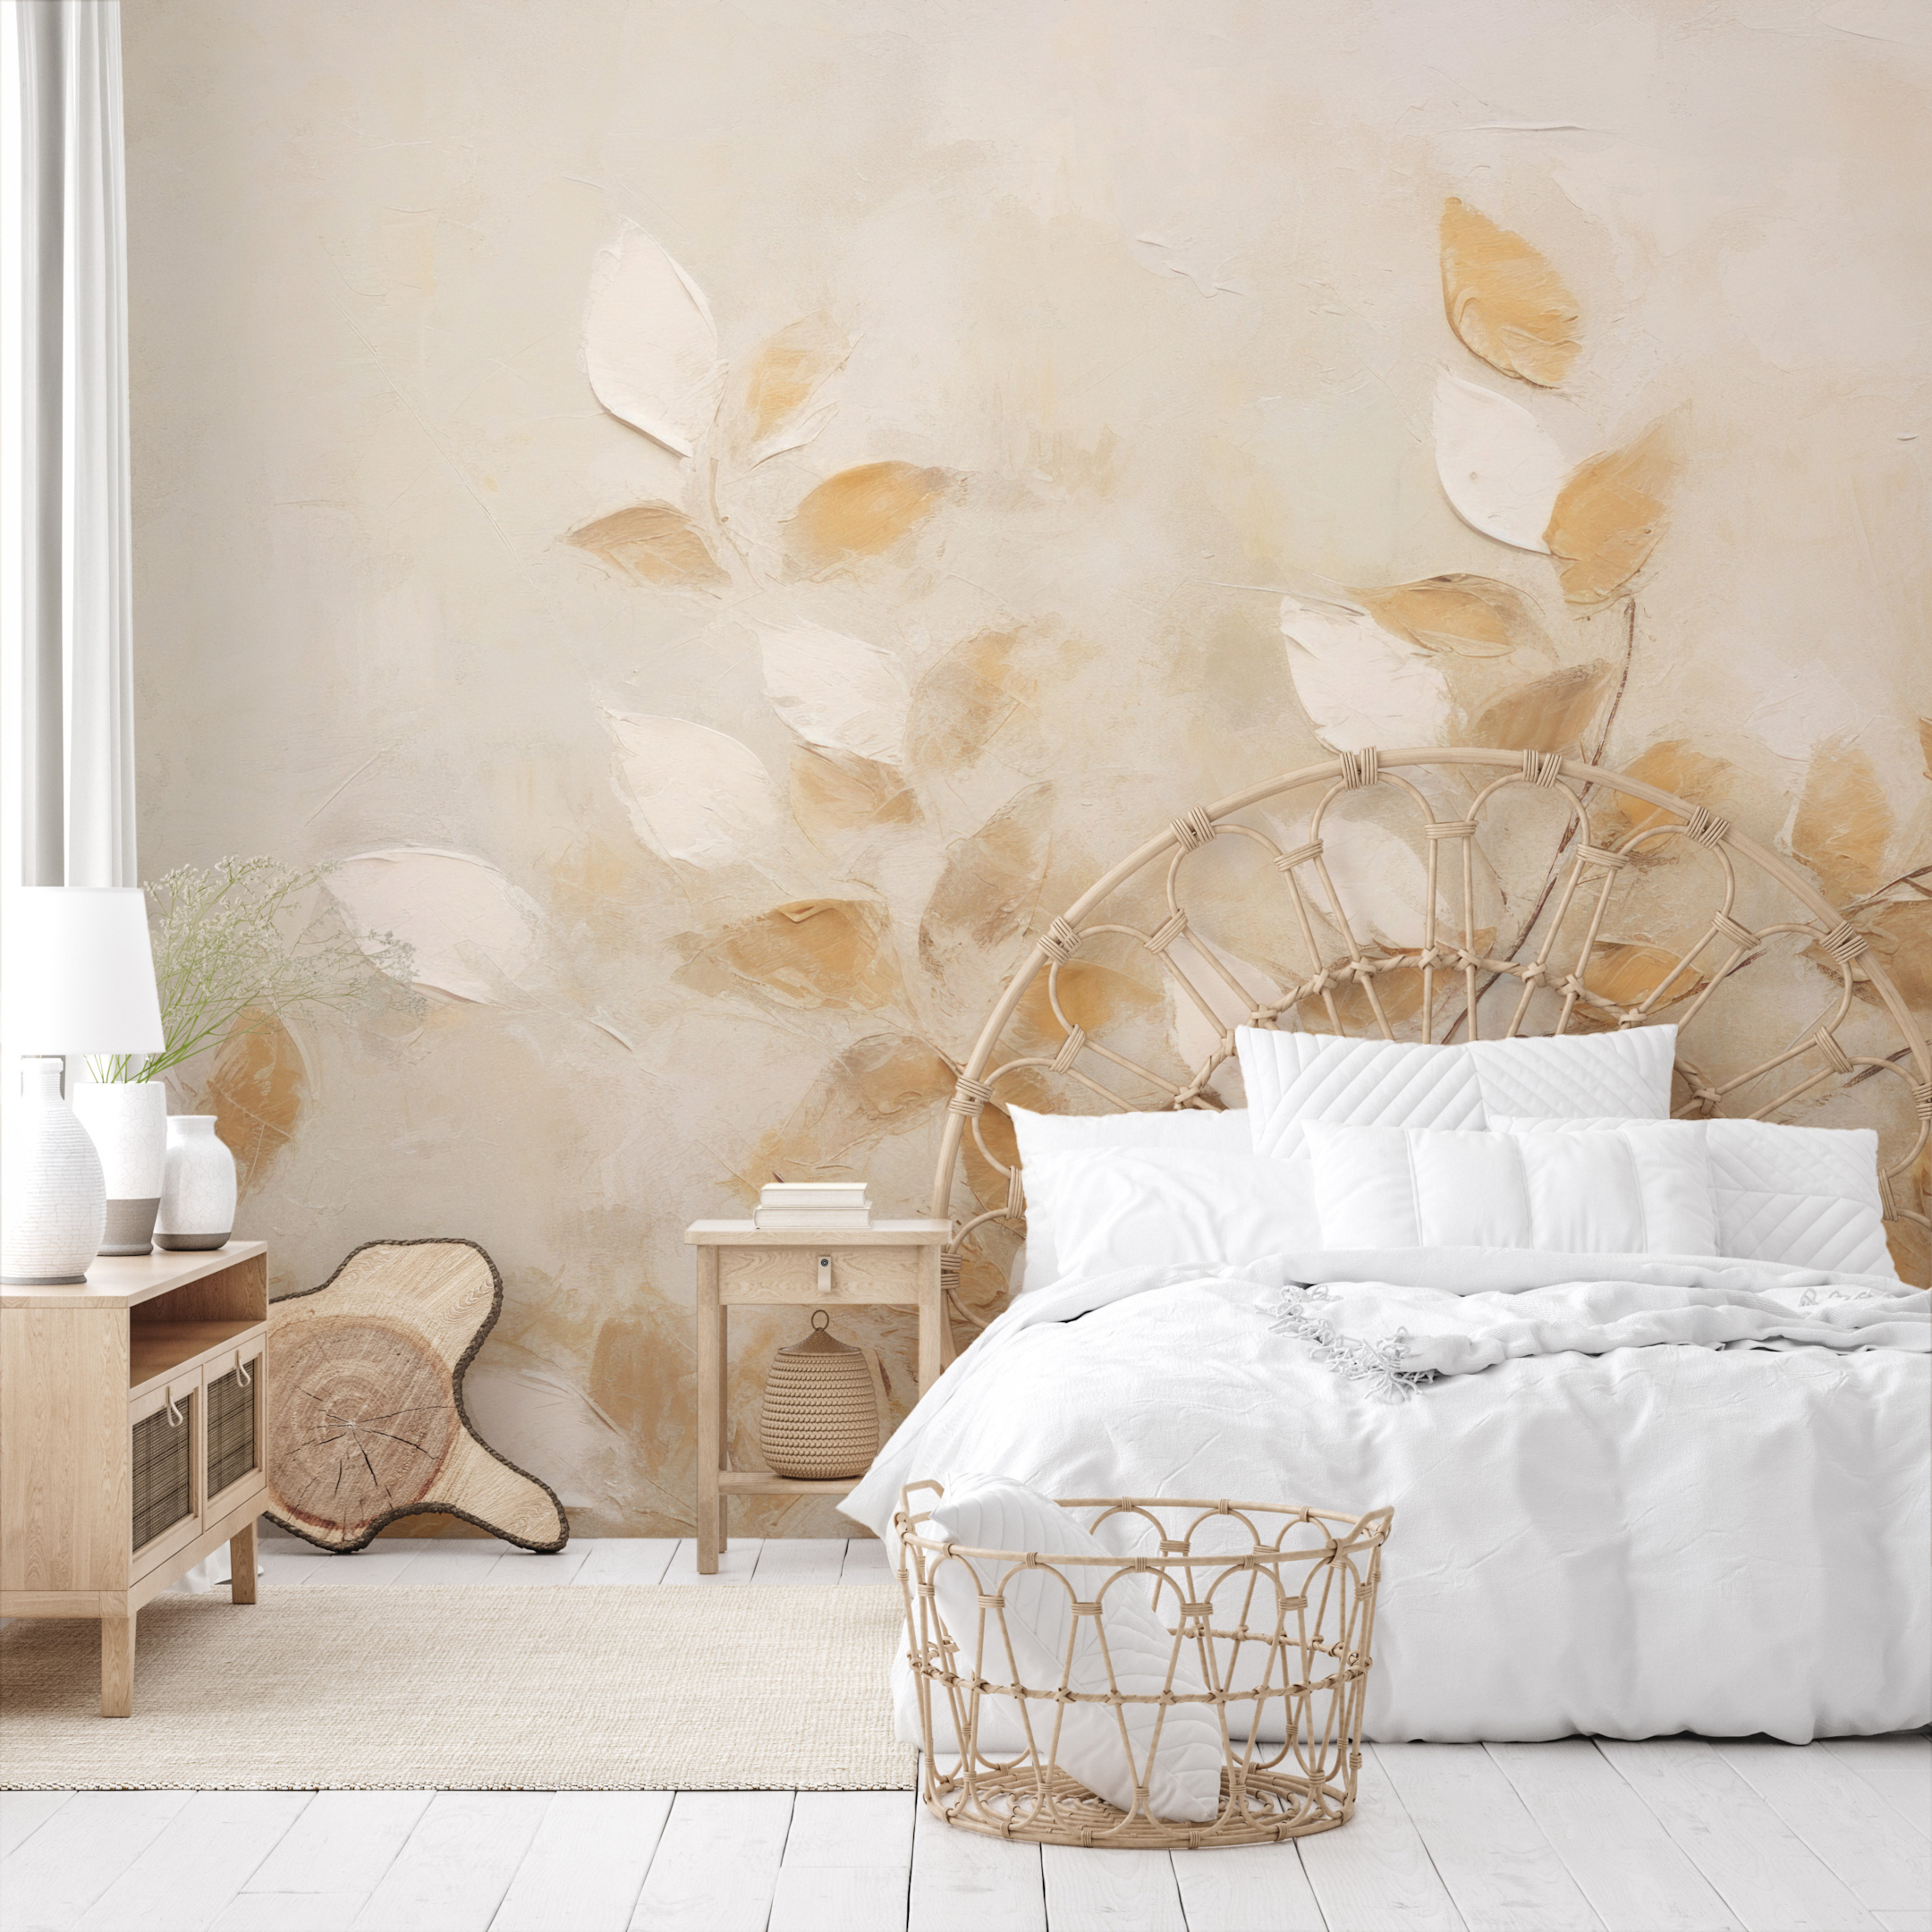 Golden Touch' is a photo wallpaper emanating the subtle glow of golden accents on leaves, thrown on a neutral background. It is a combination of nature with a bit of luxury, creating an atmosphere of sophistication and warmth. This pattern will perfectly complement elegant, contemporary spaces, adding character and a delicate shine.